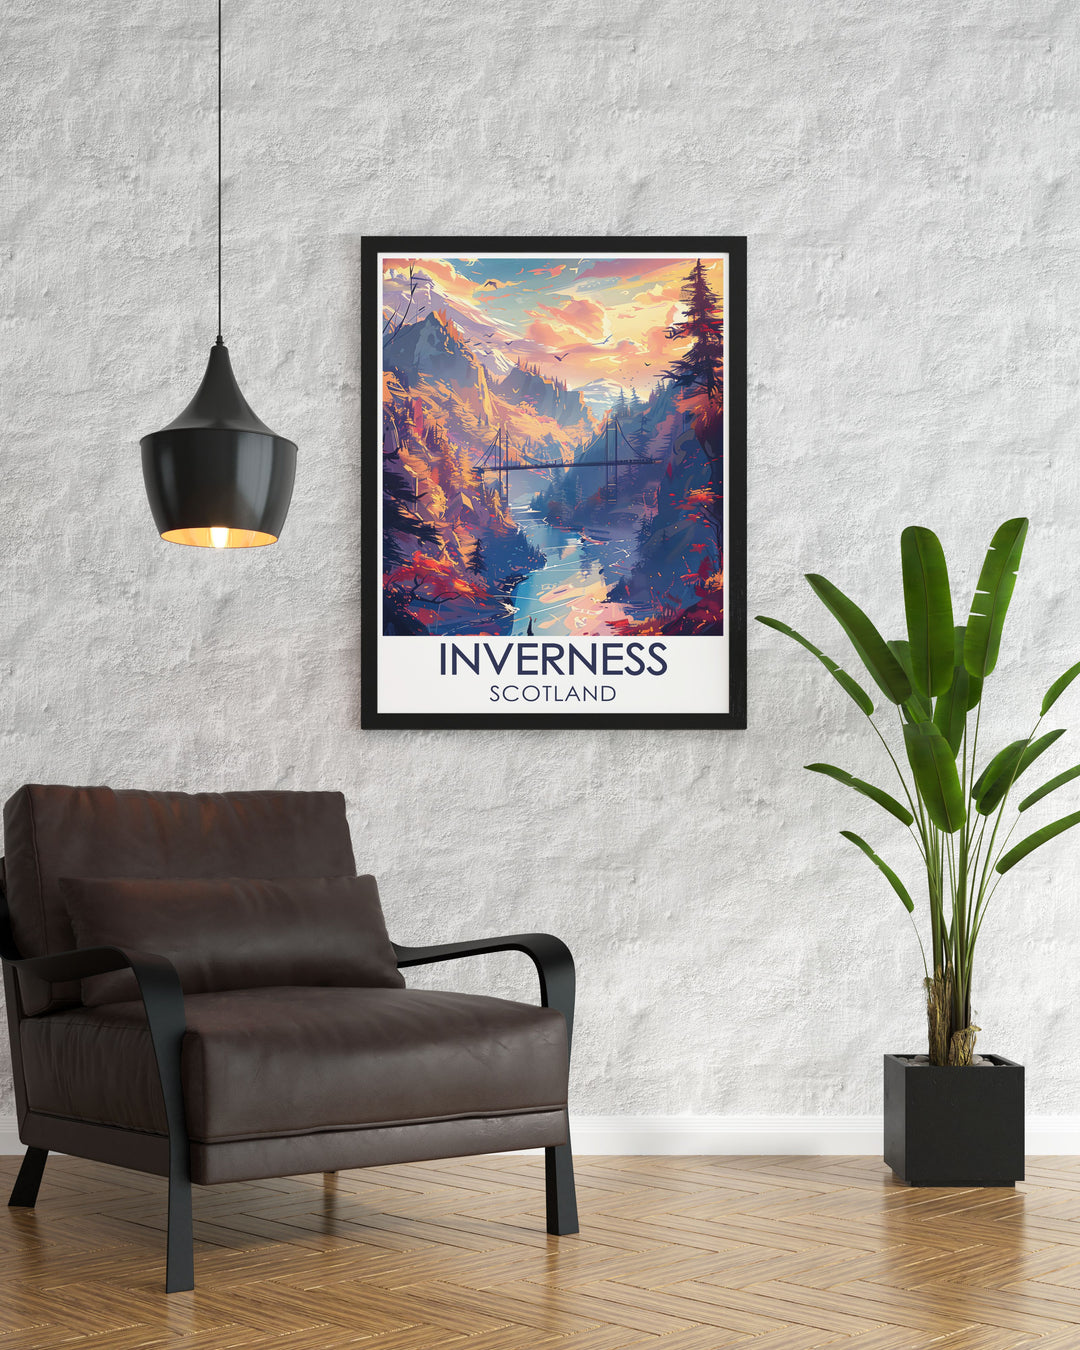 Gallery wall art of Inverness Castle, highlighting its historical significance and architectural beauty, set against the picturesque backdrop of the Scottish Highlands.